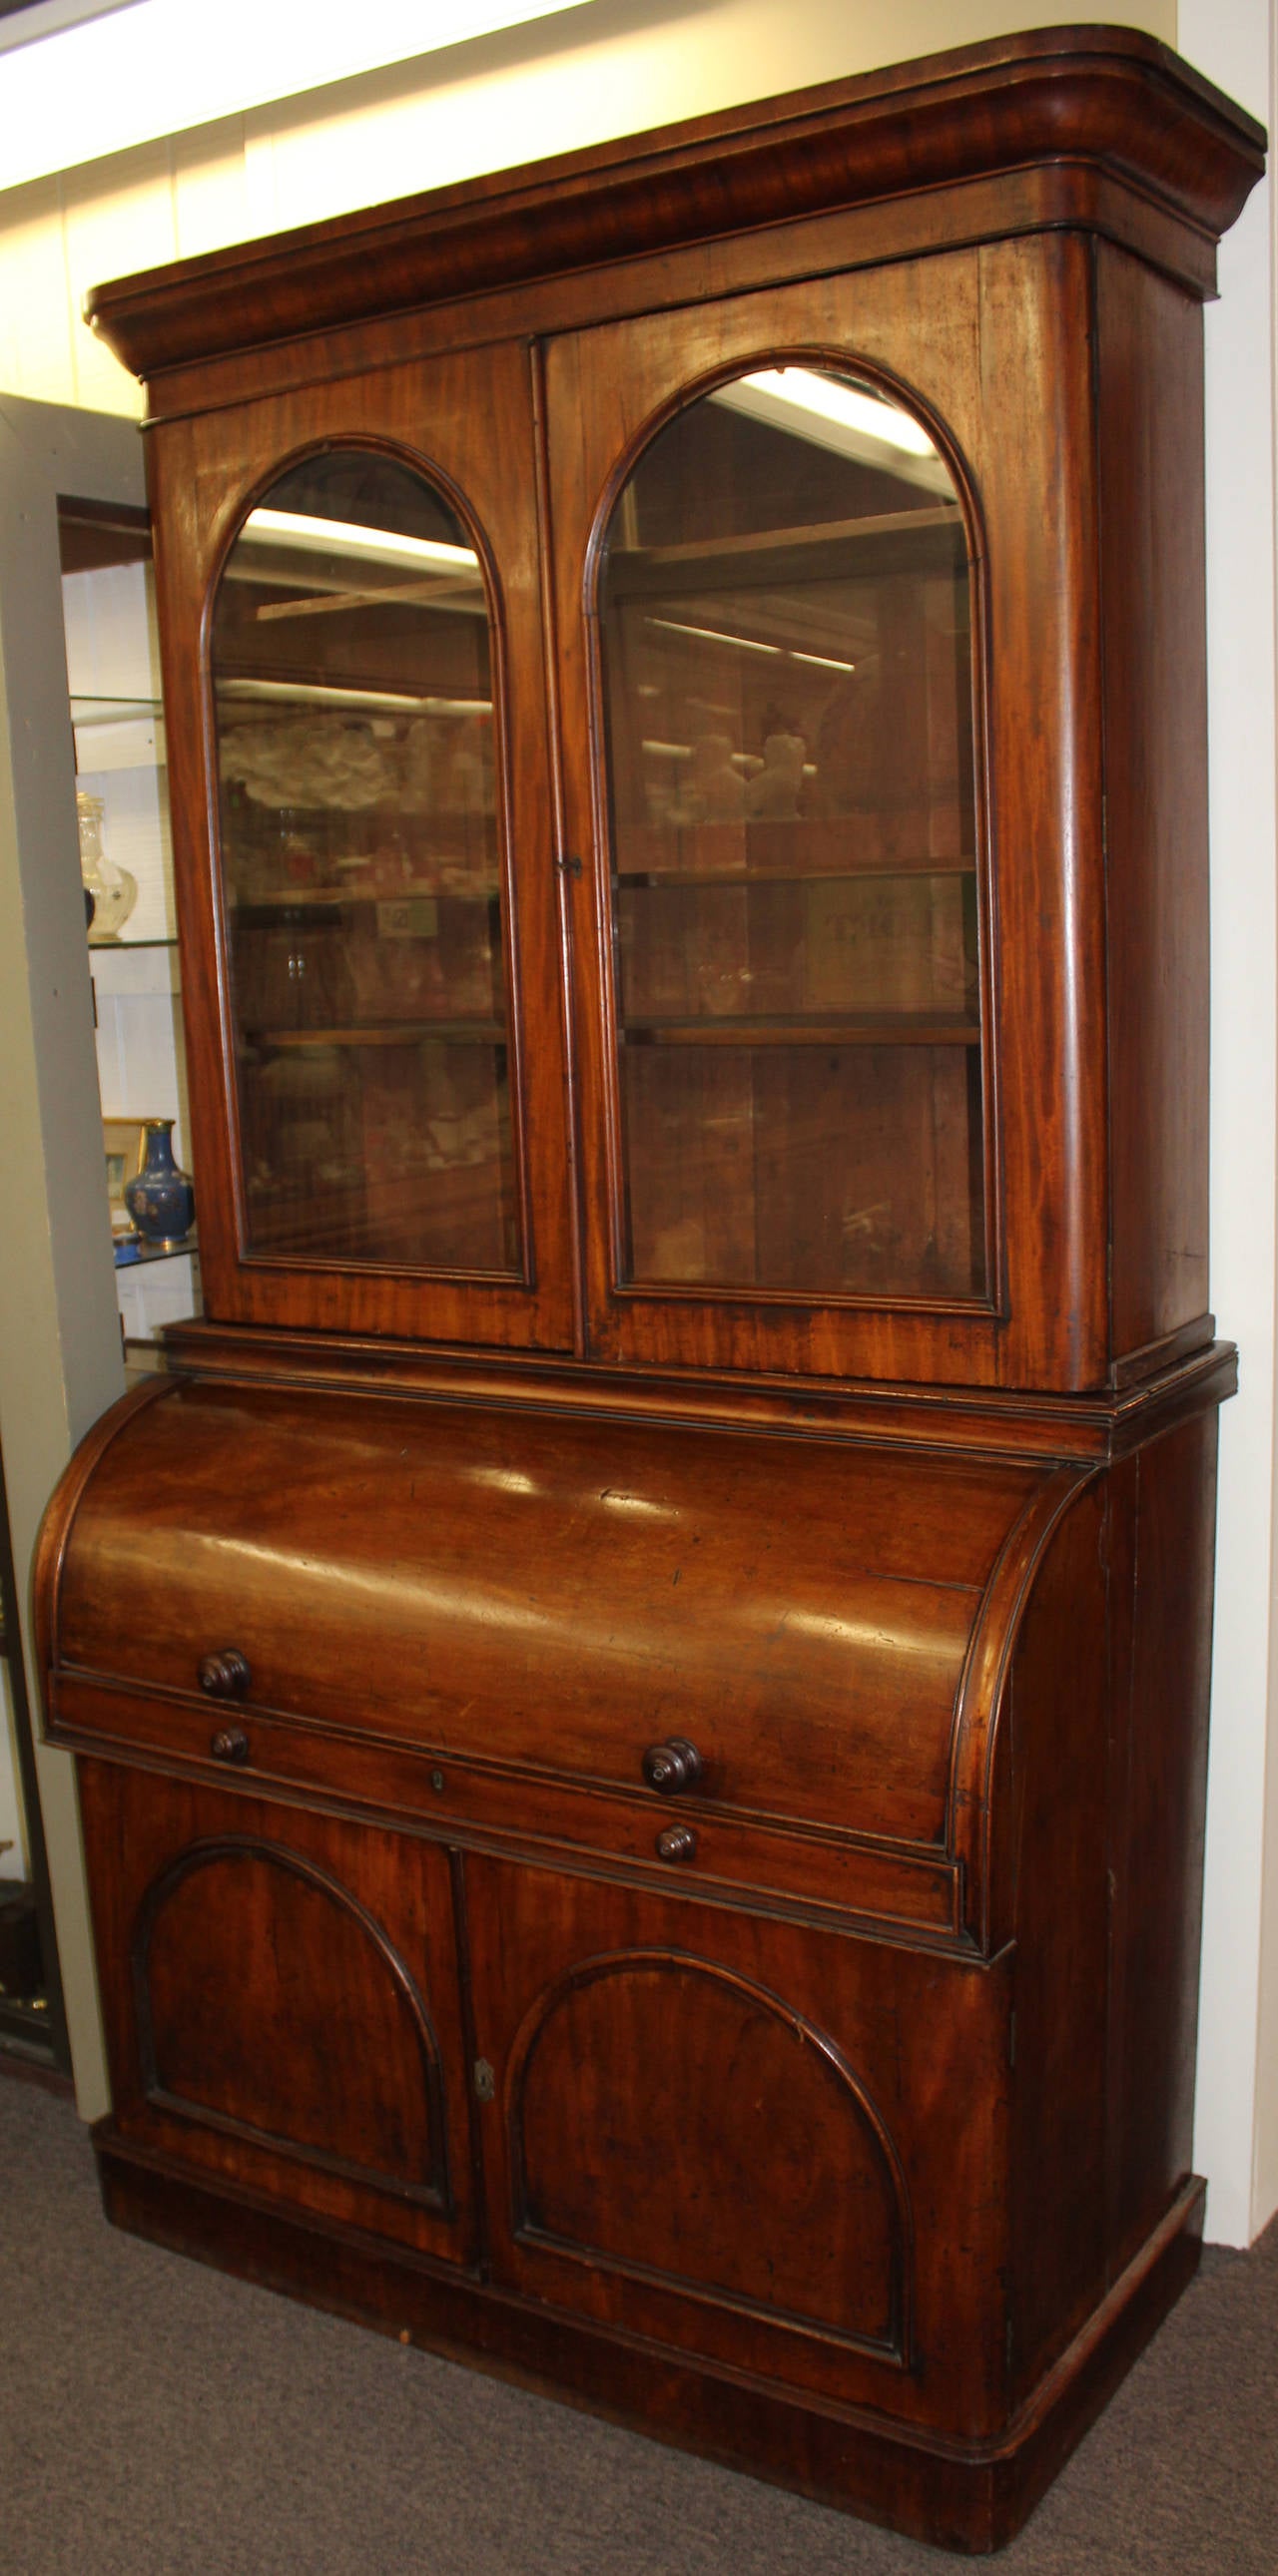 A 19th century two part walnut English cylinder secretary desk and bookcase with nicely compartmentalized interior featuring a sliding writing surface with tooled leather and well chosen burled veneers. The two glazed arched doors in the upper